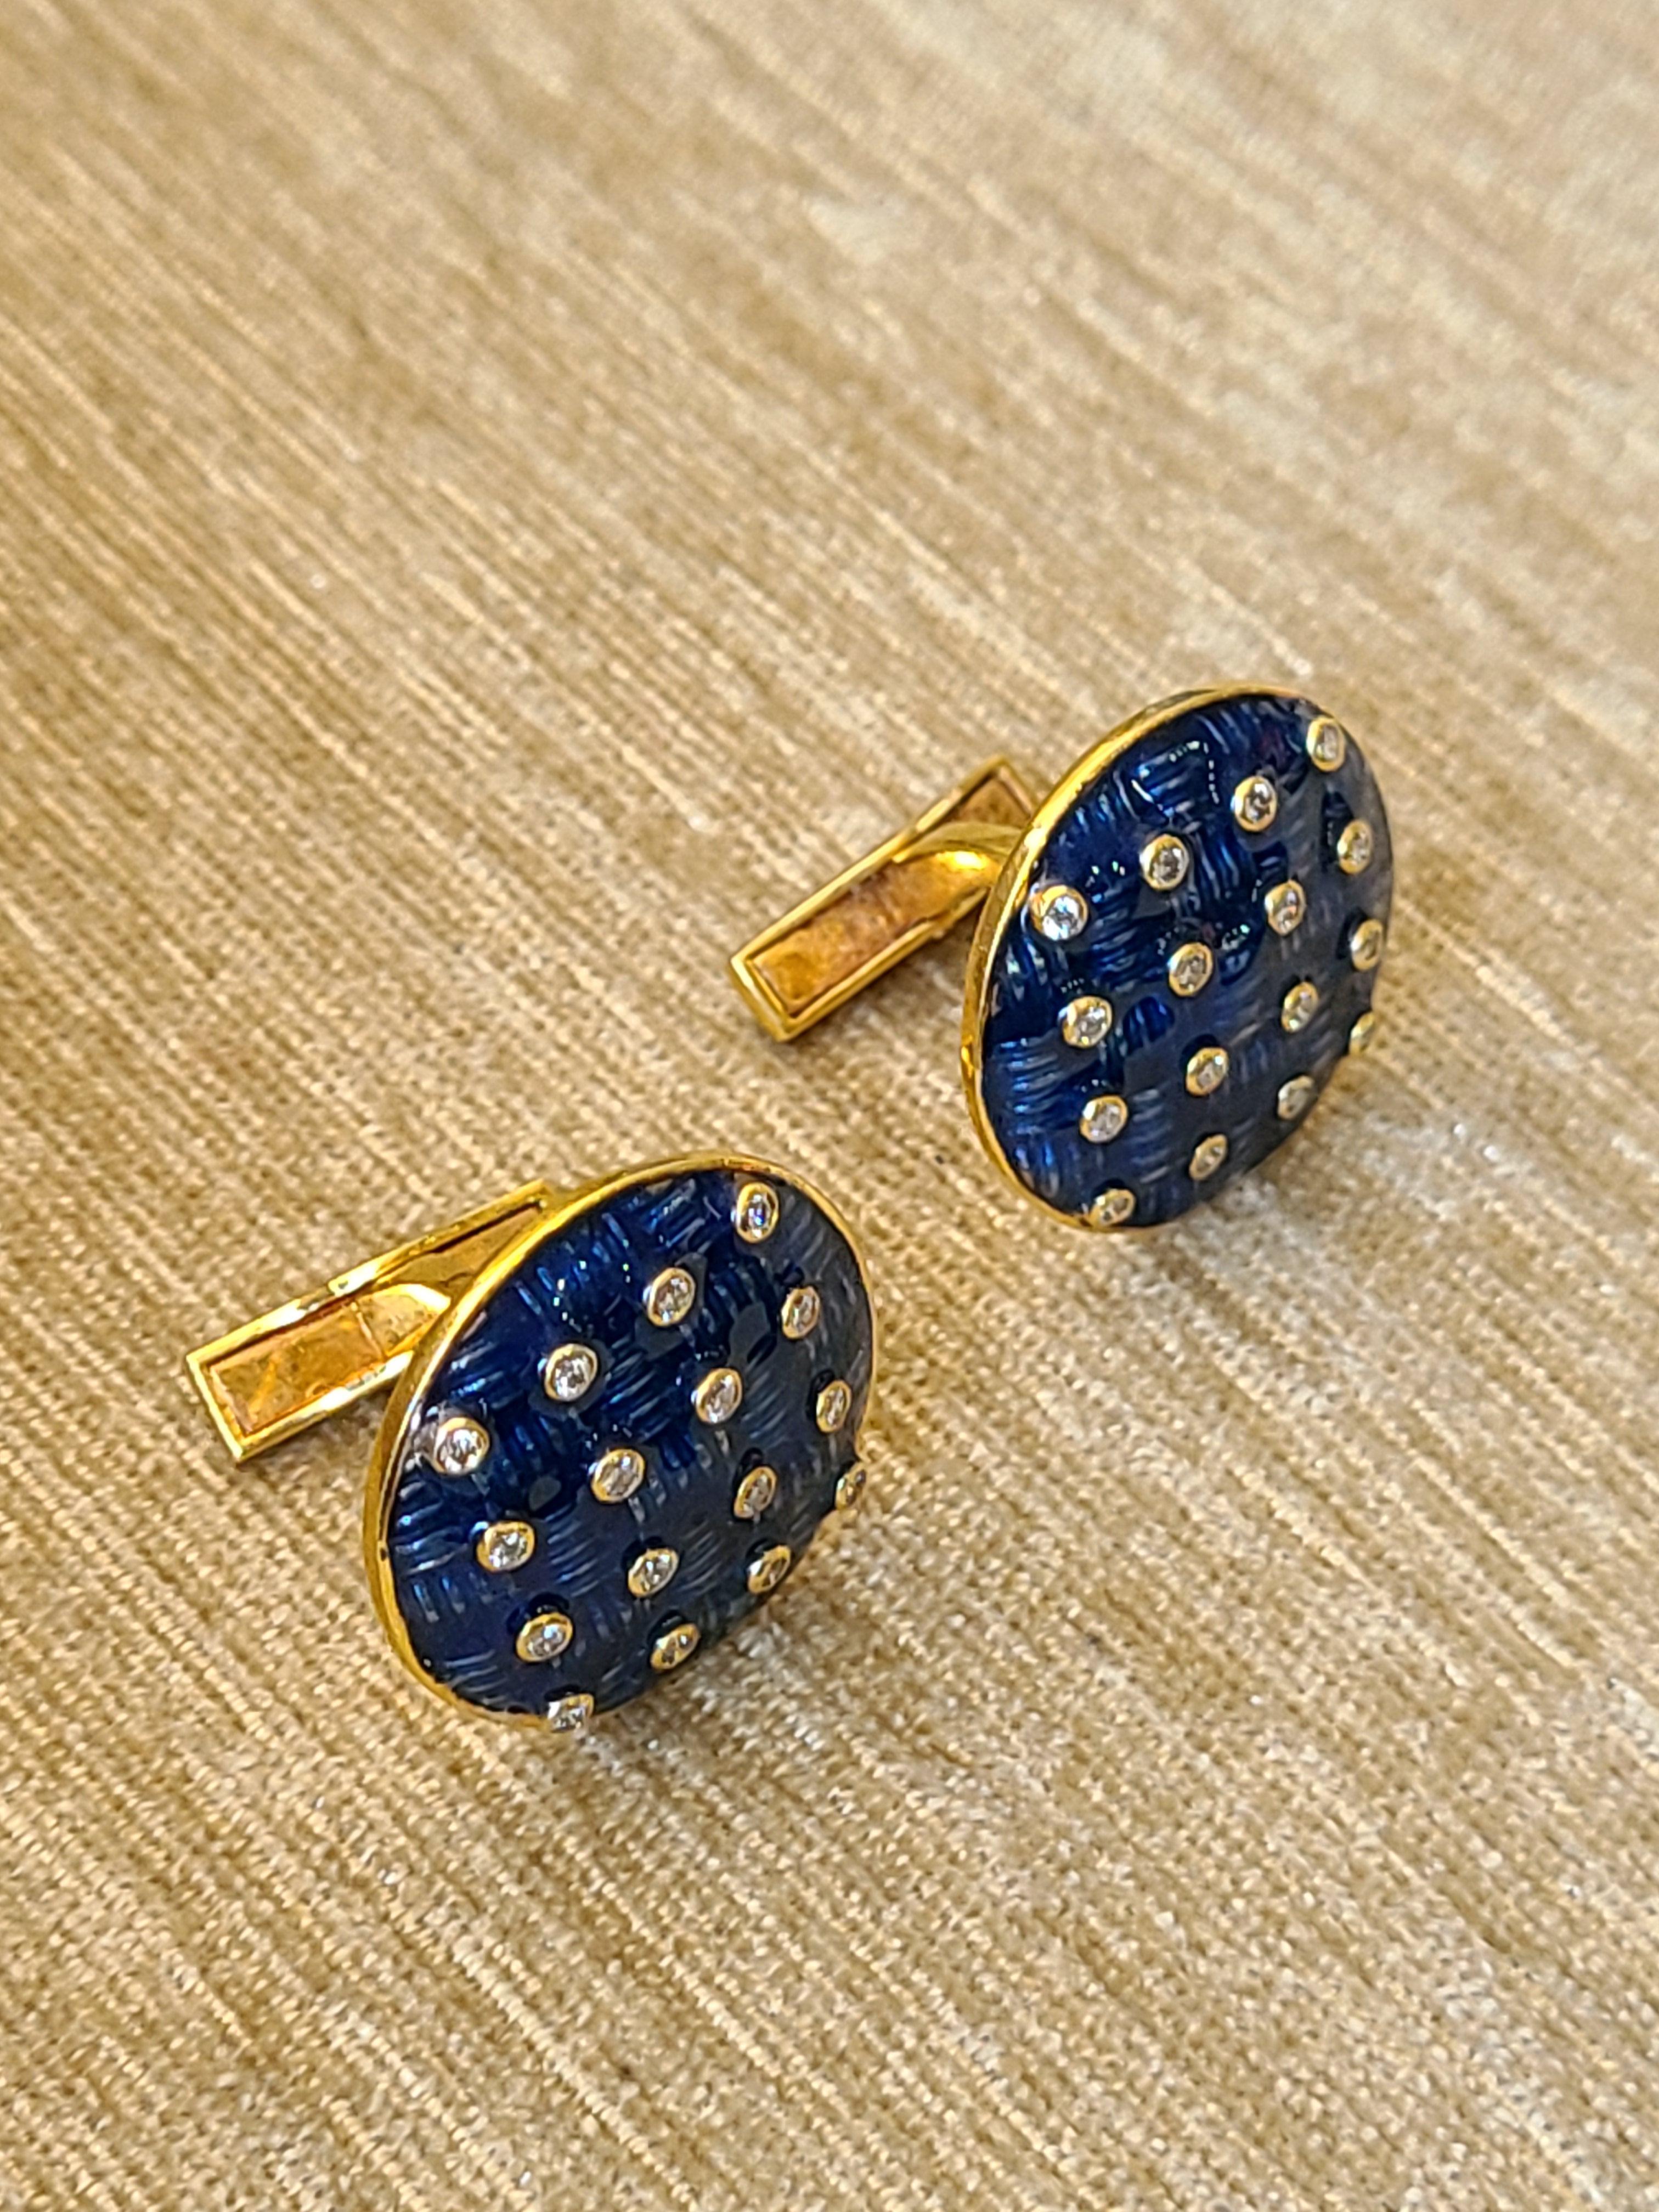 A pair of gorgeous cufflinks set in 14k yellow gold with natural diamonds and high finish blue enamel. The diamond weight is .25 carats and net gold weight is 15.39 grams. The cufflinks dimensions in cm 2.1 x 2.1 x 1.9 (LXWXD).